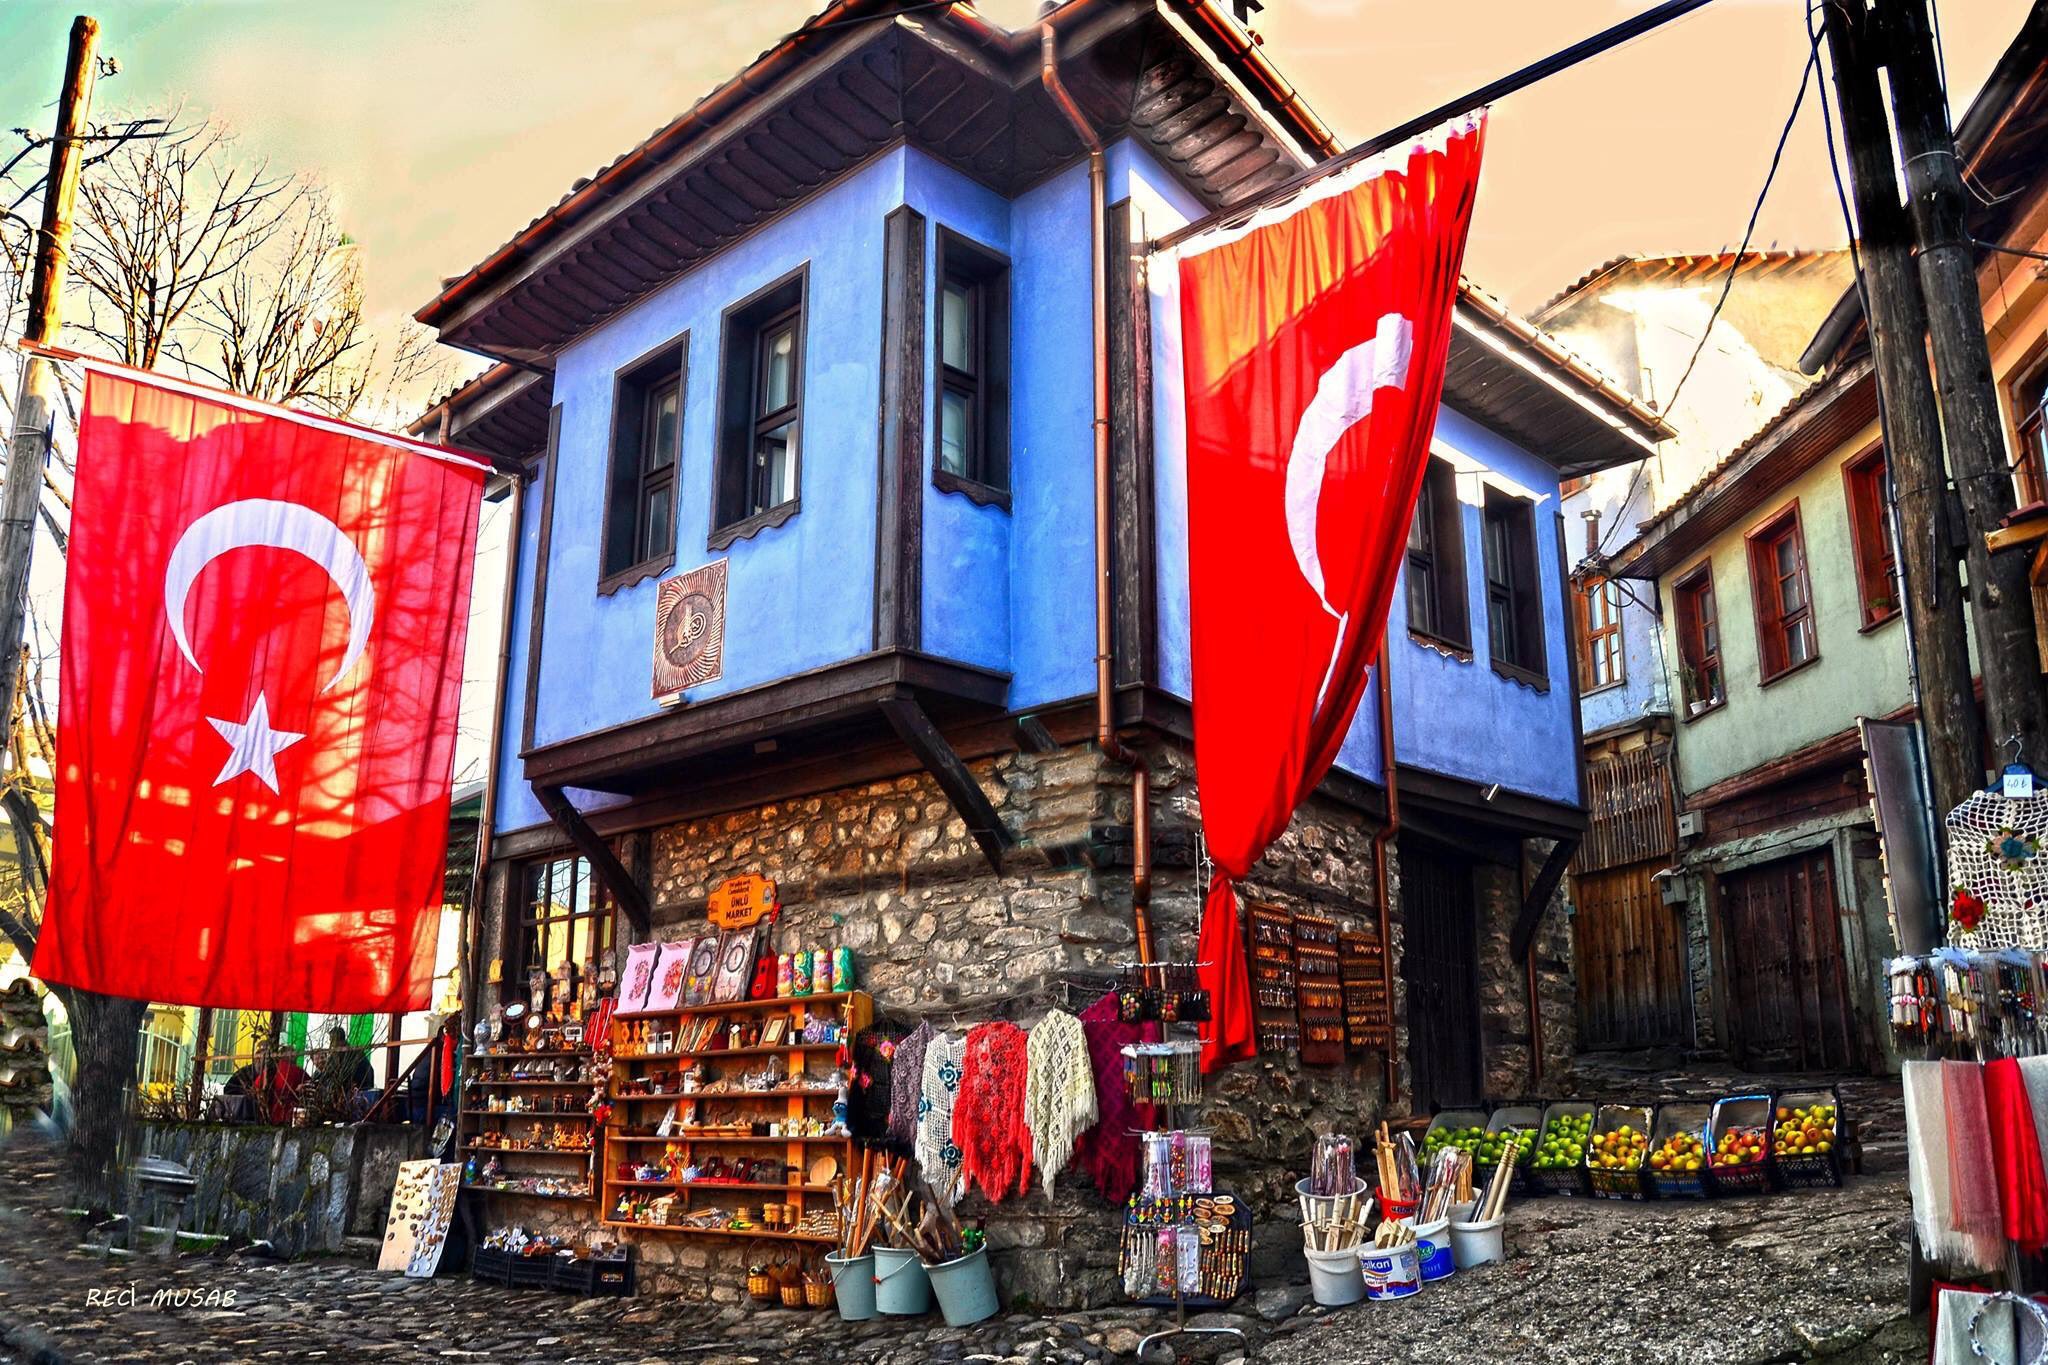 A Journey through the Ottoman-era Architecture and Culture